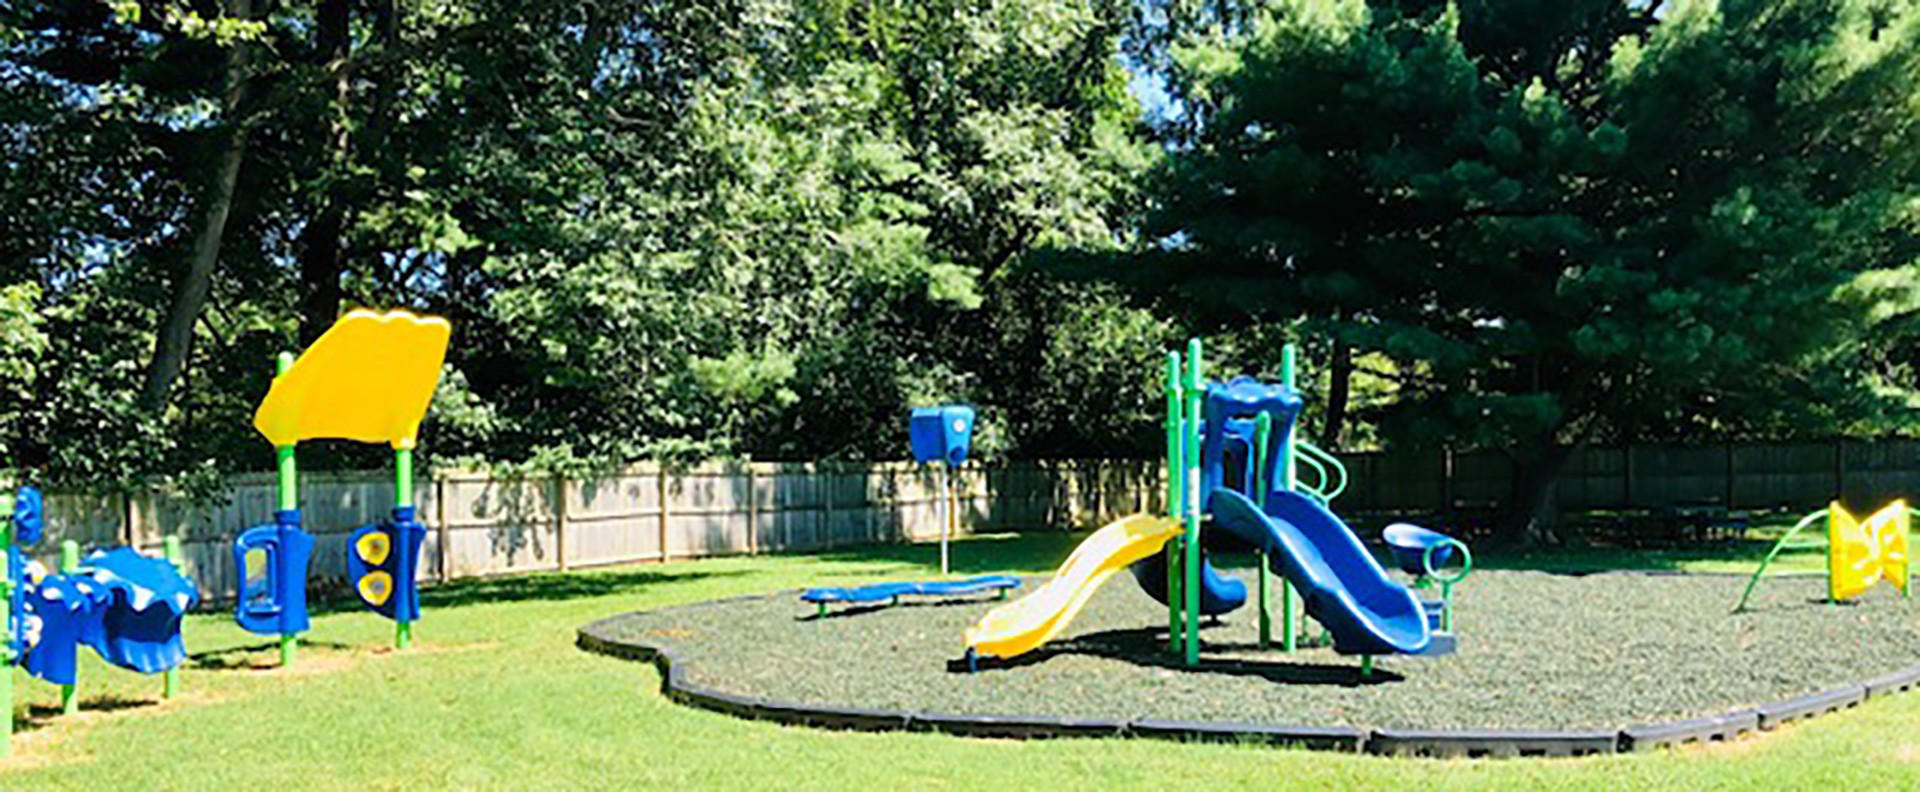 playground with a blue slide during the summer and trees in background